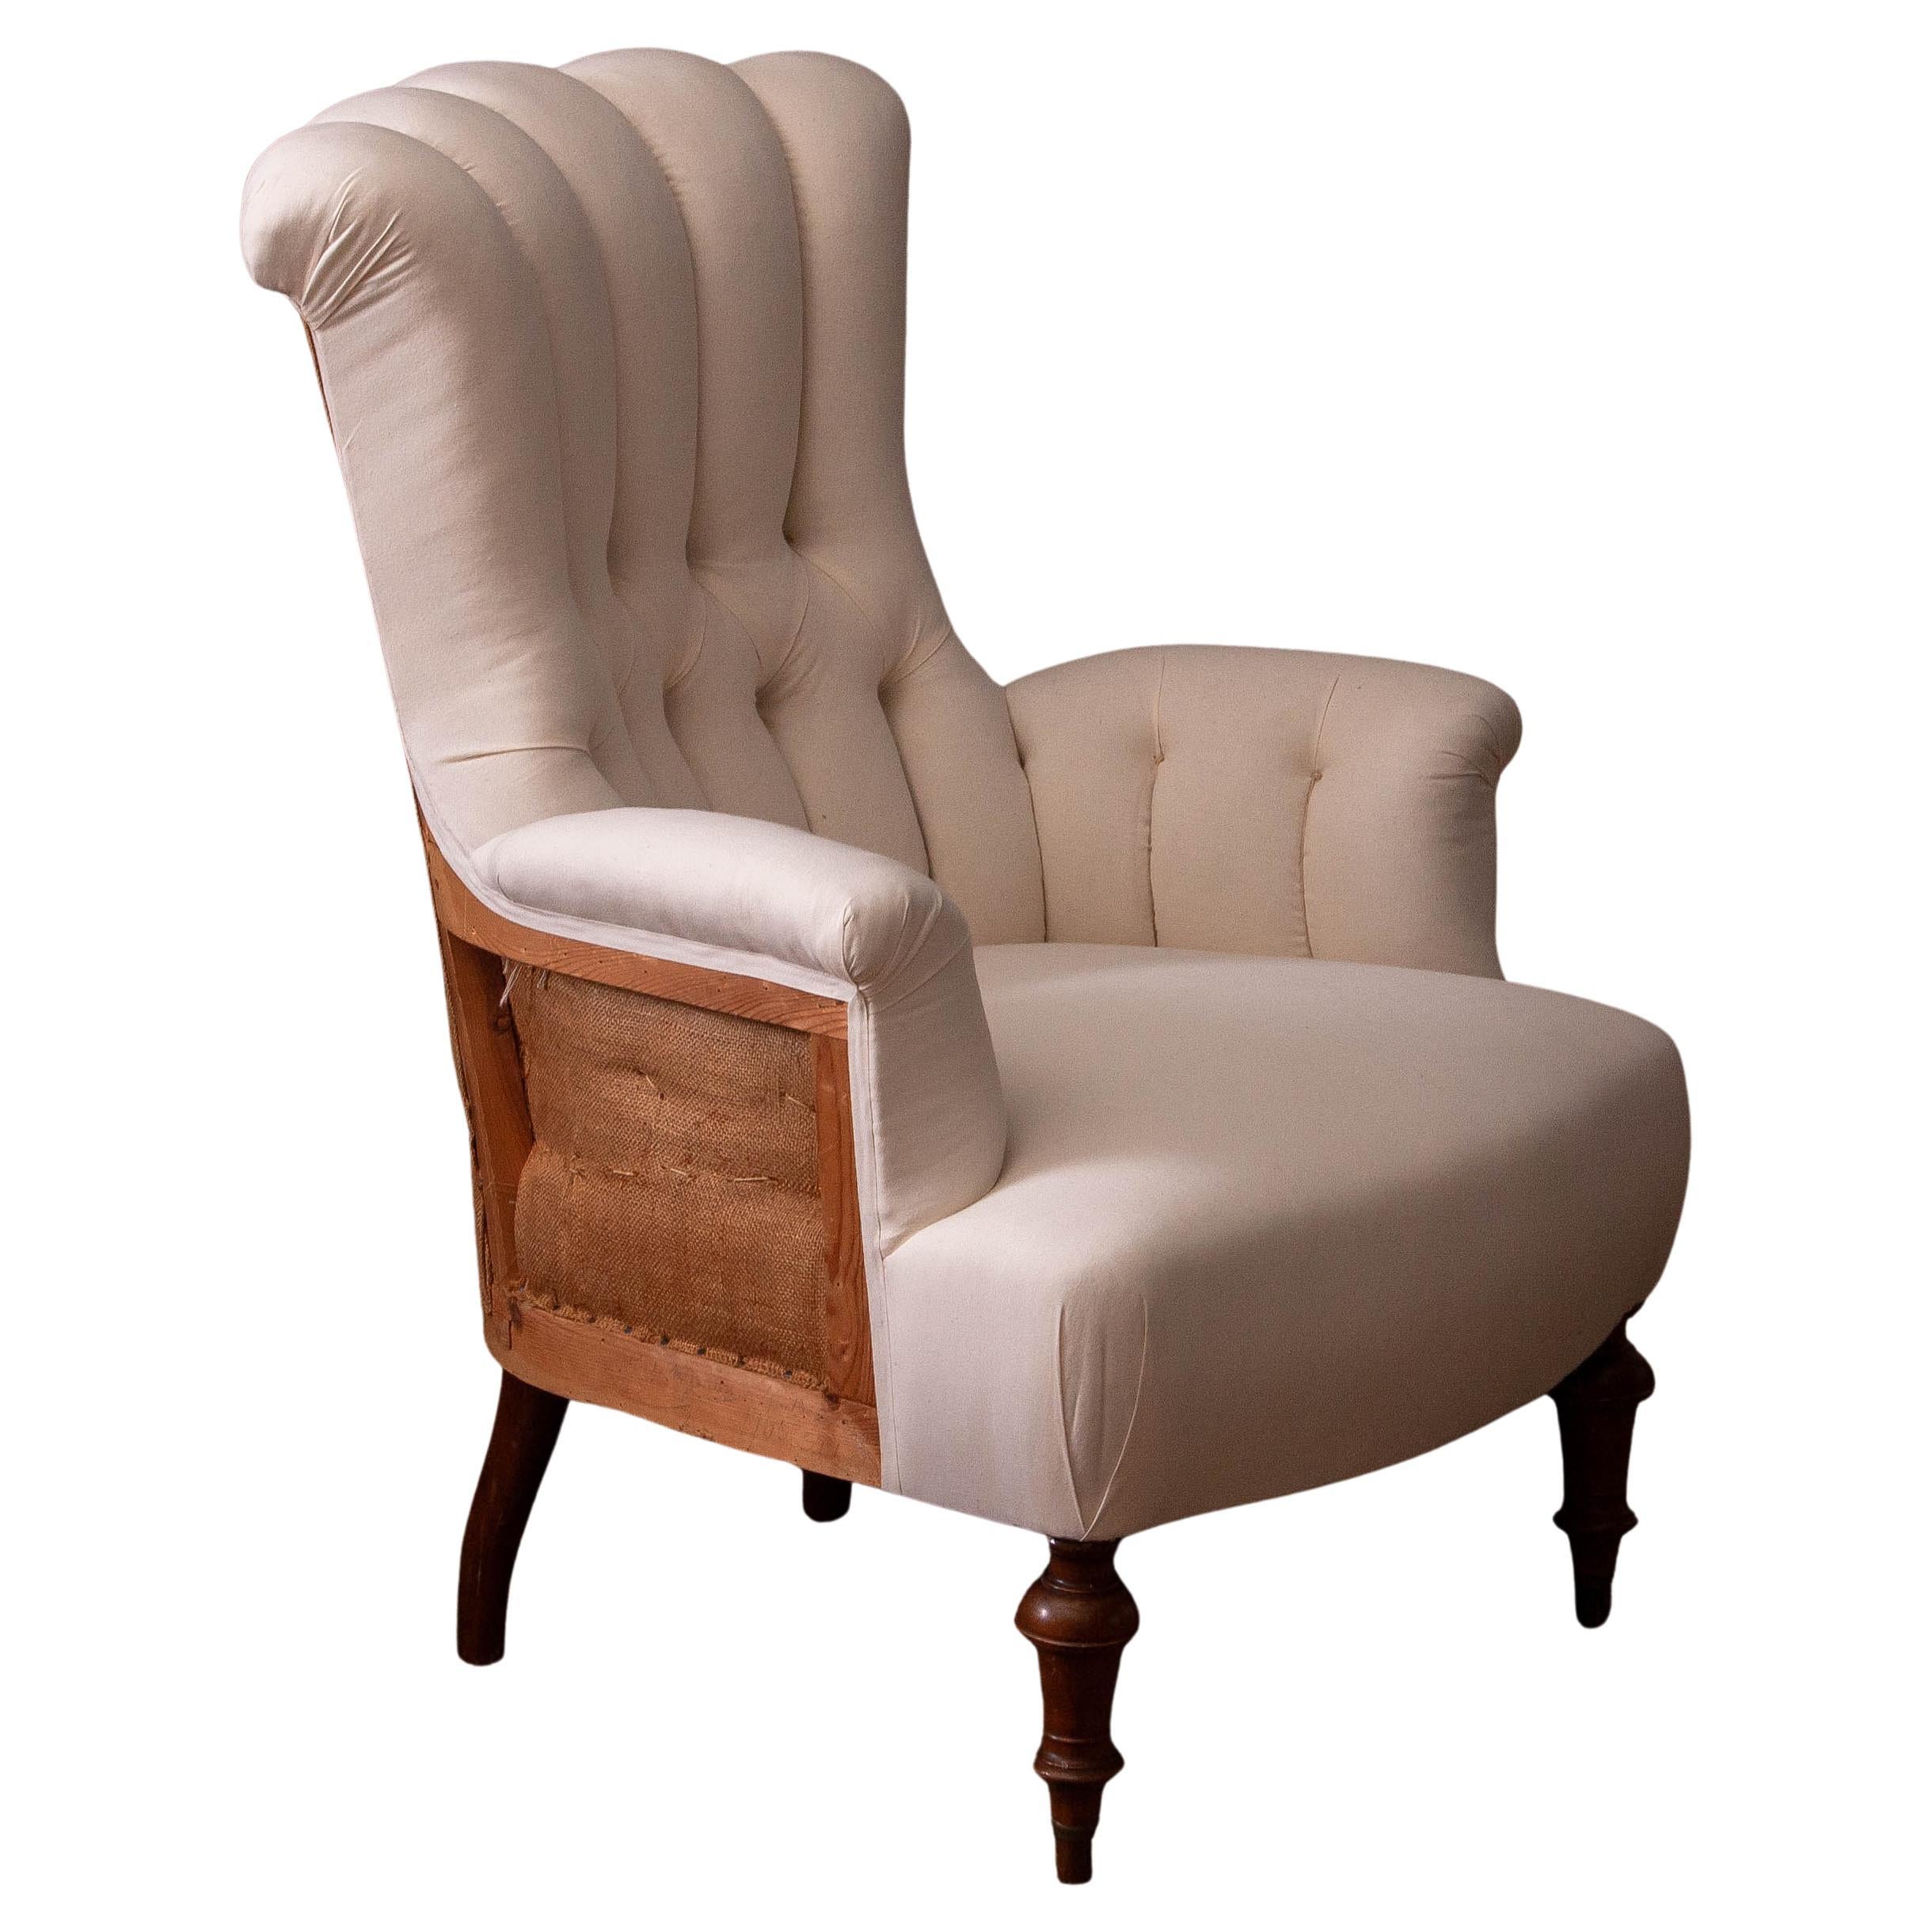 19th Century Domestic Cotton Victorian 'Deconstructed' Tufted Scroll-Back Chair For Sale